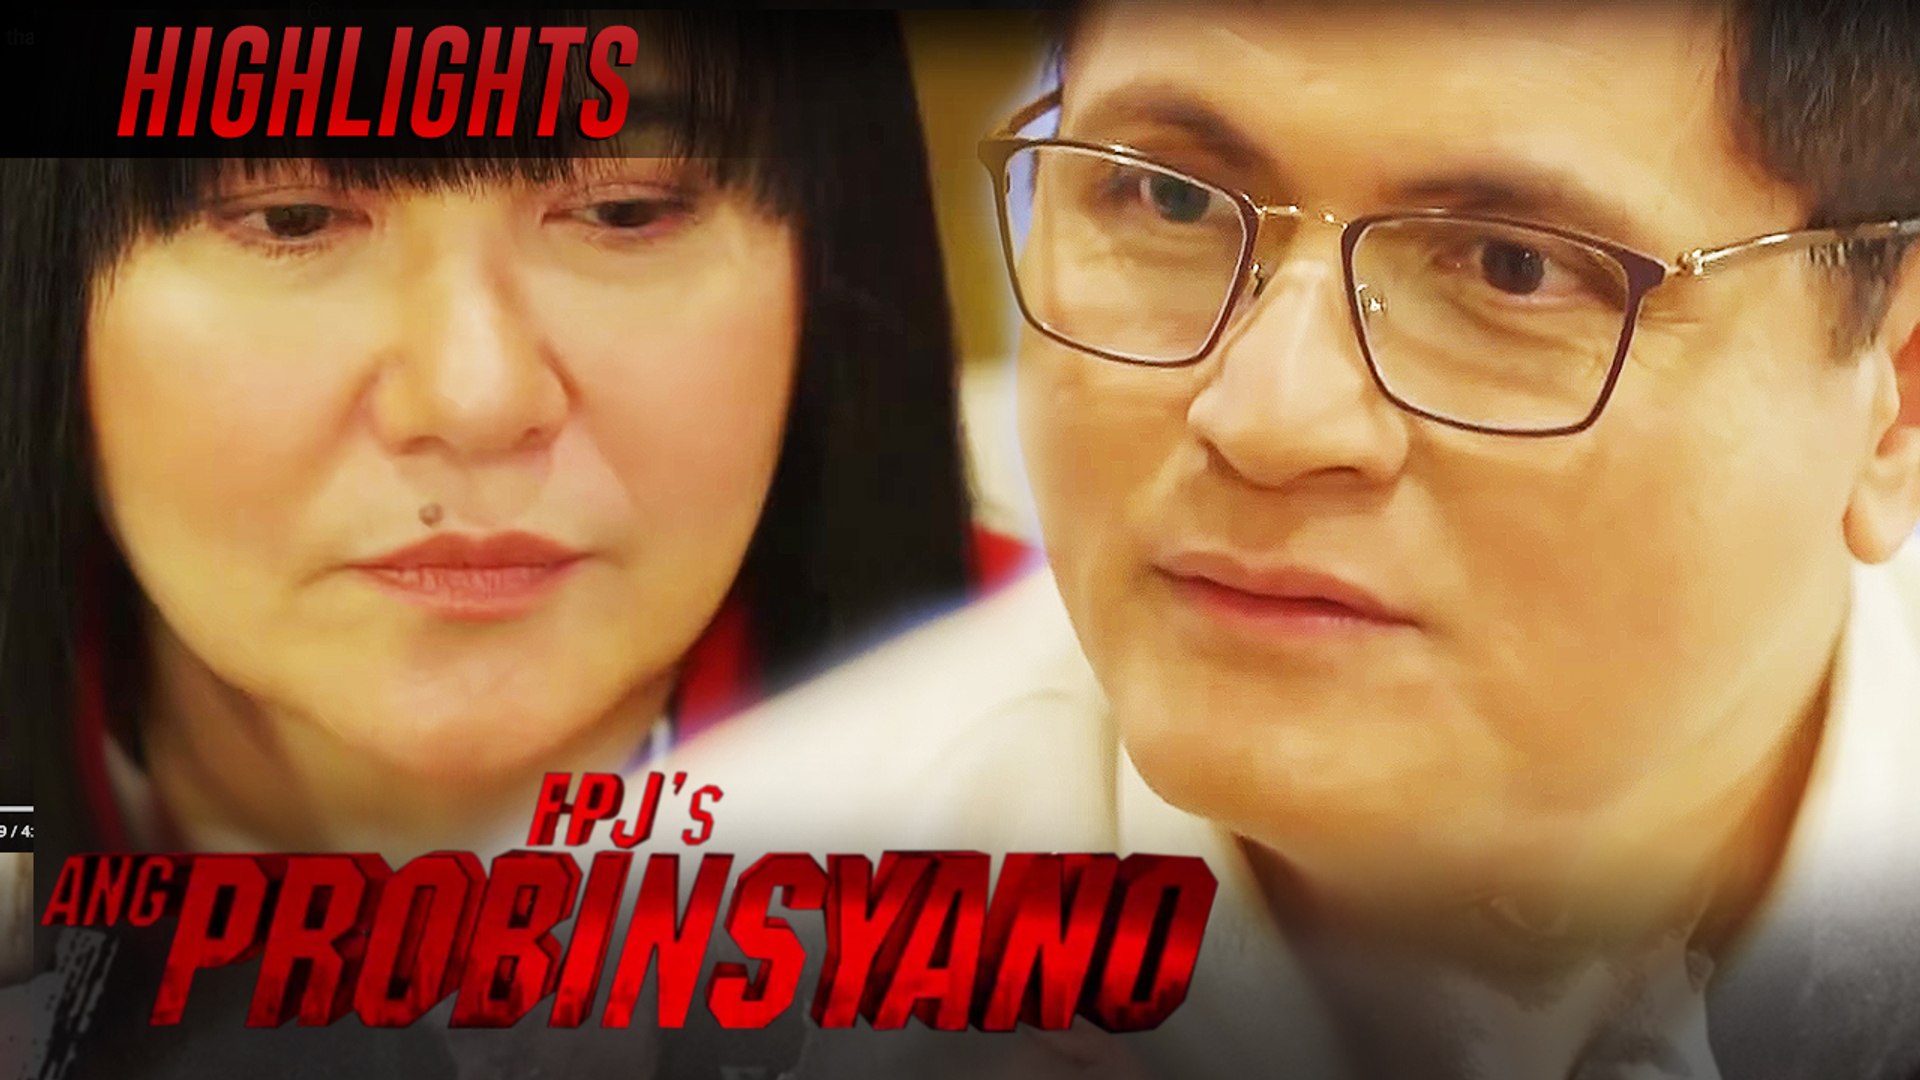 Oscar notices that Lily is bothered | FPJ's Ang Probinsyano